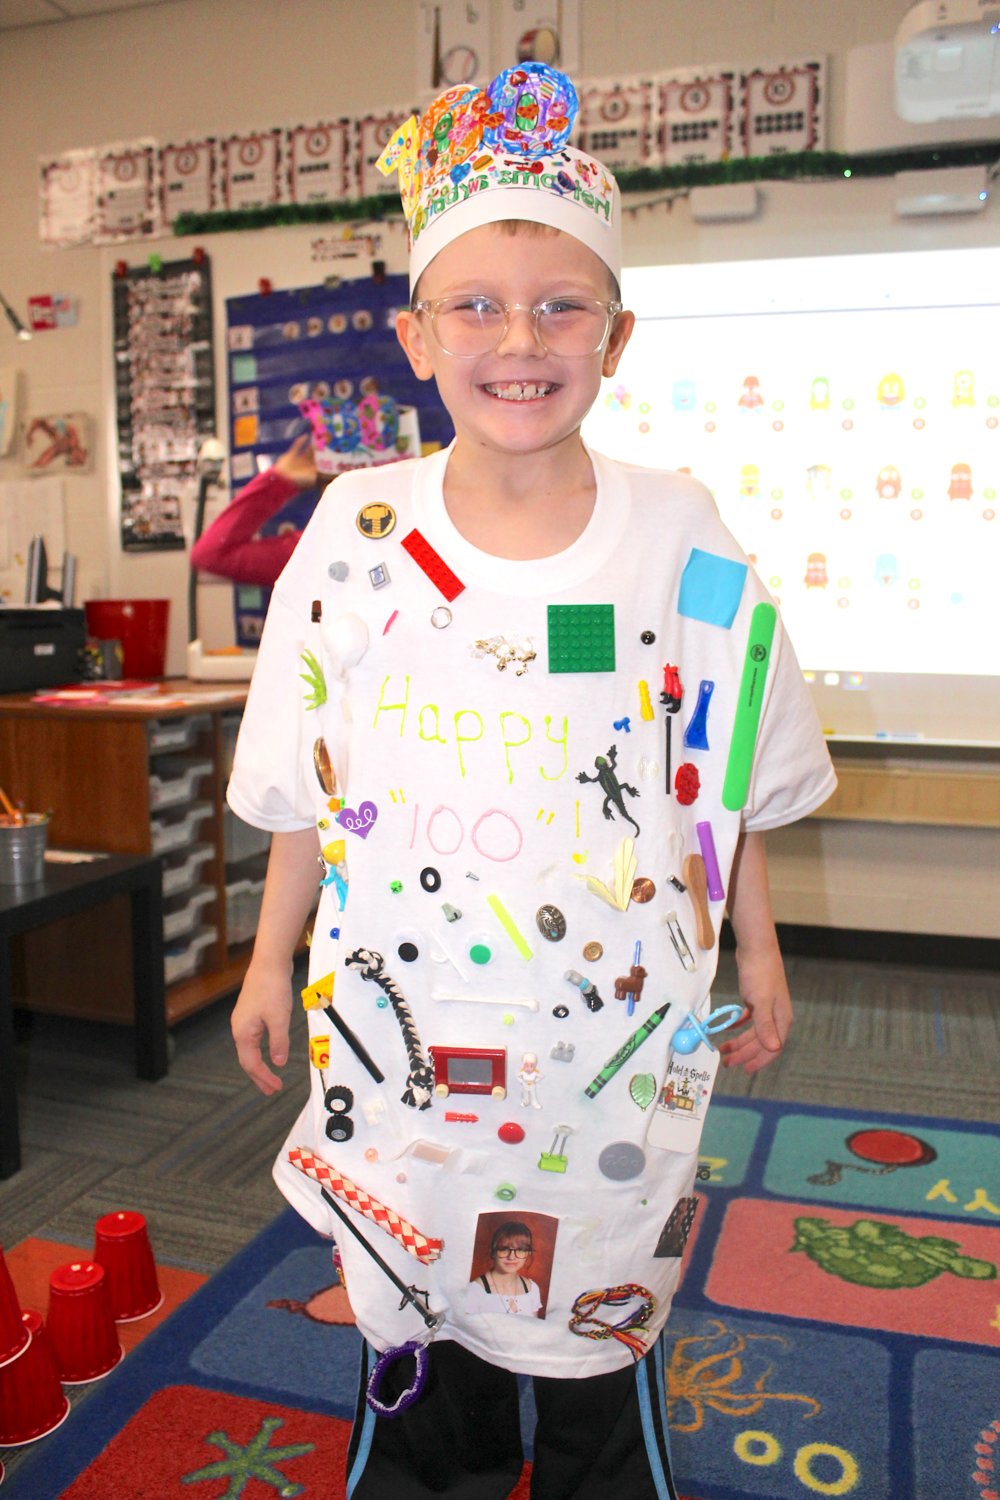 Nathanial Fosdick-Stingley, 7, shows off his school spirit by wearing a shirt with 100 items attached Wednesday at Hose Elementary.